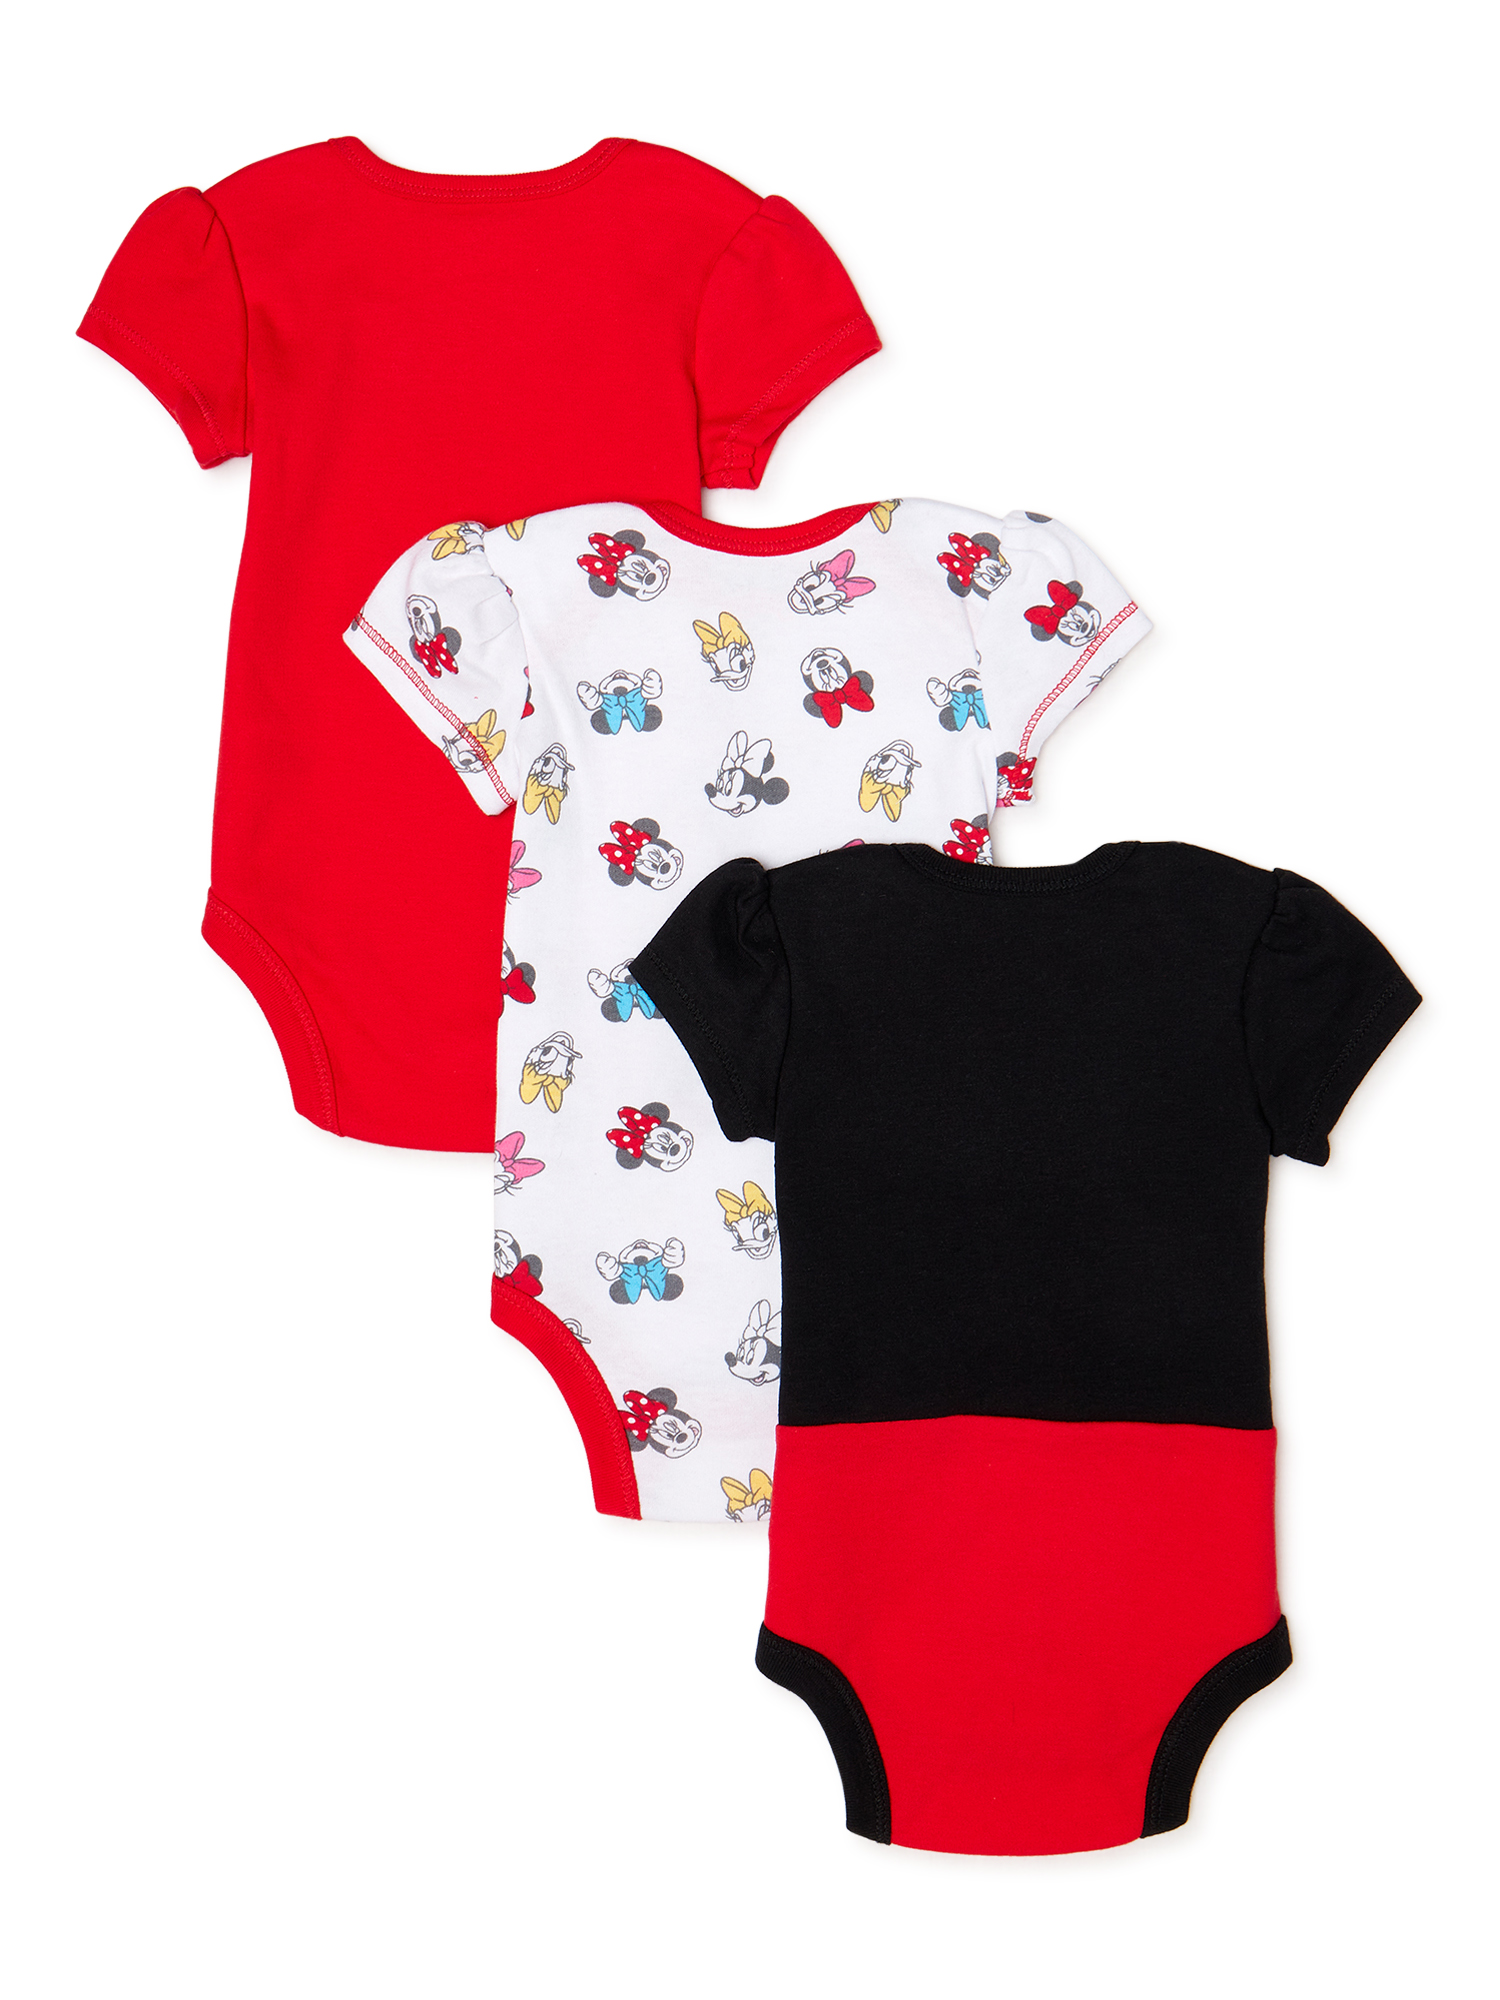 Disney Baby Girl Minnie Mouse Baby Girl Bodysuits, 3-Pack - image 2 of 3